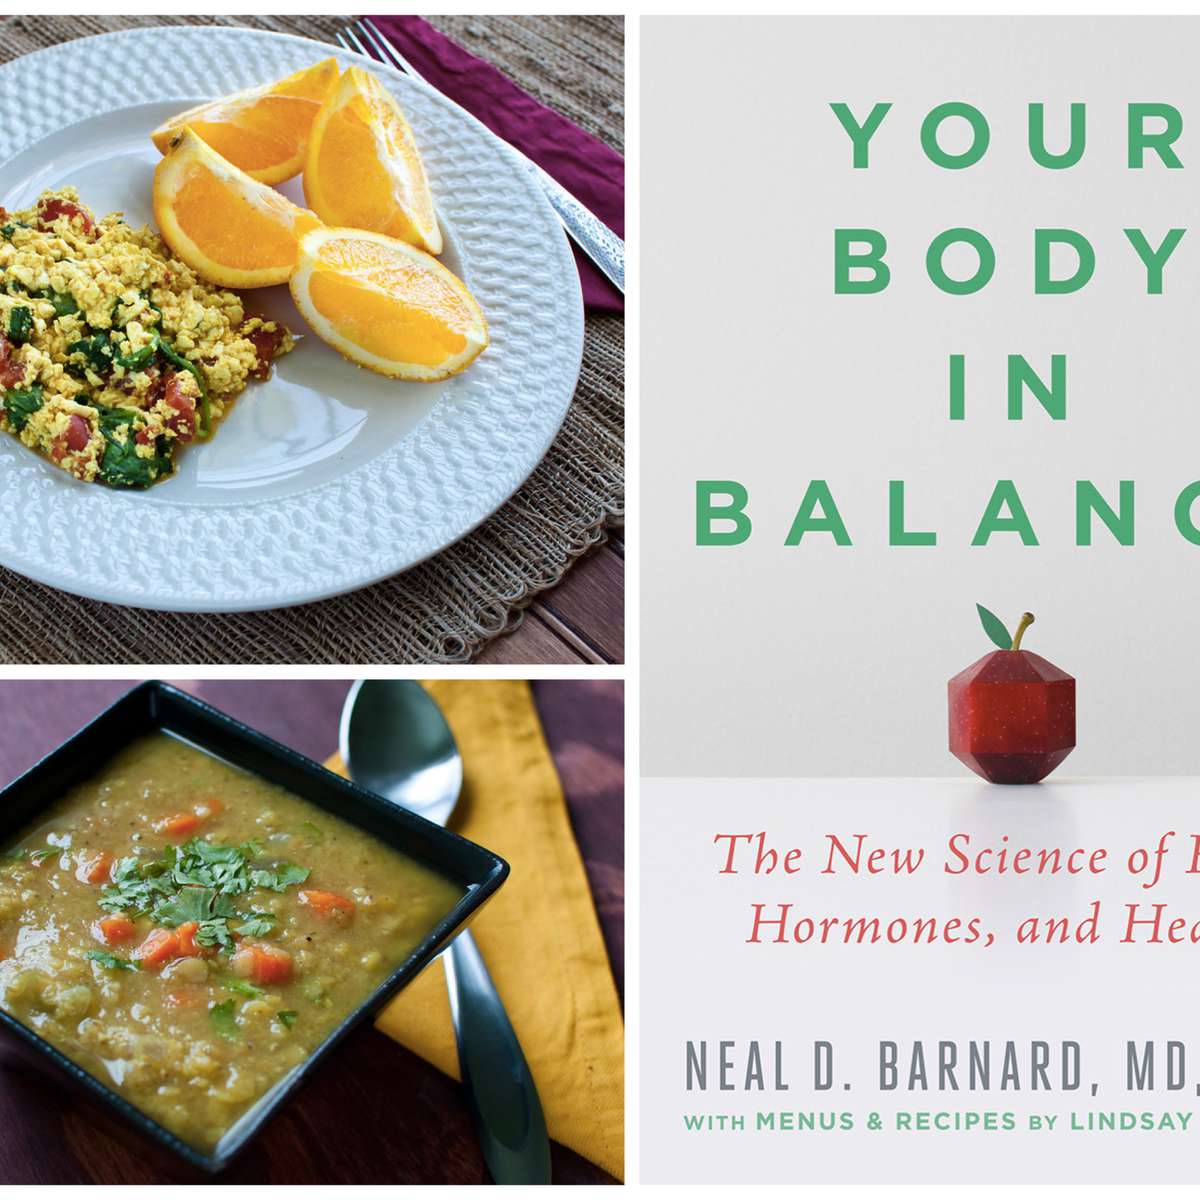 Sample Recipes from Your Body in Balance (Italiano Tofu Scr